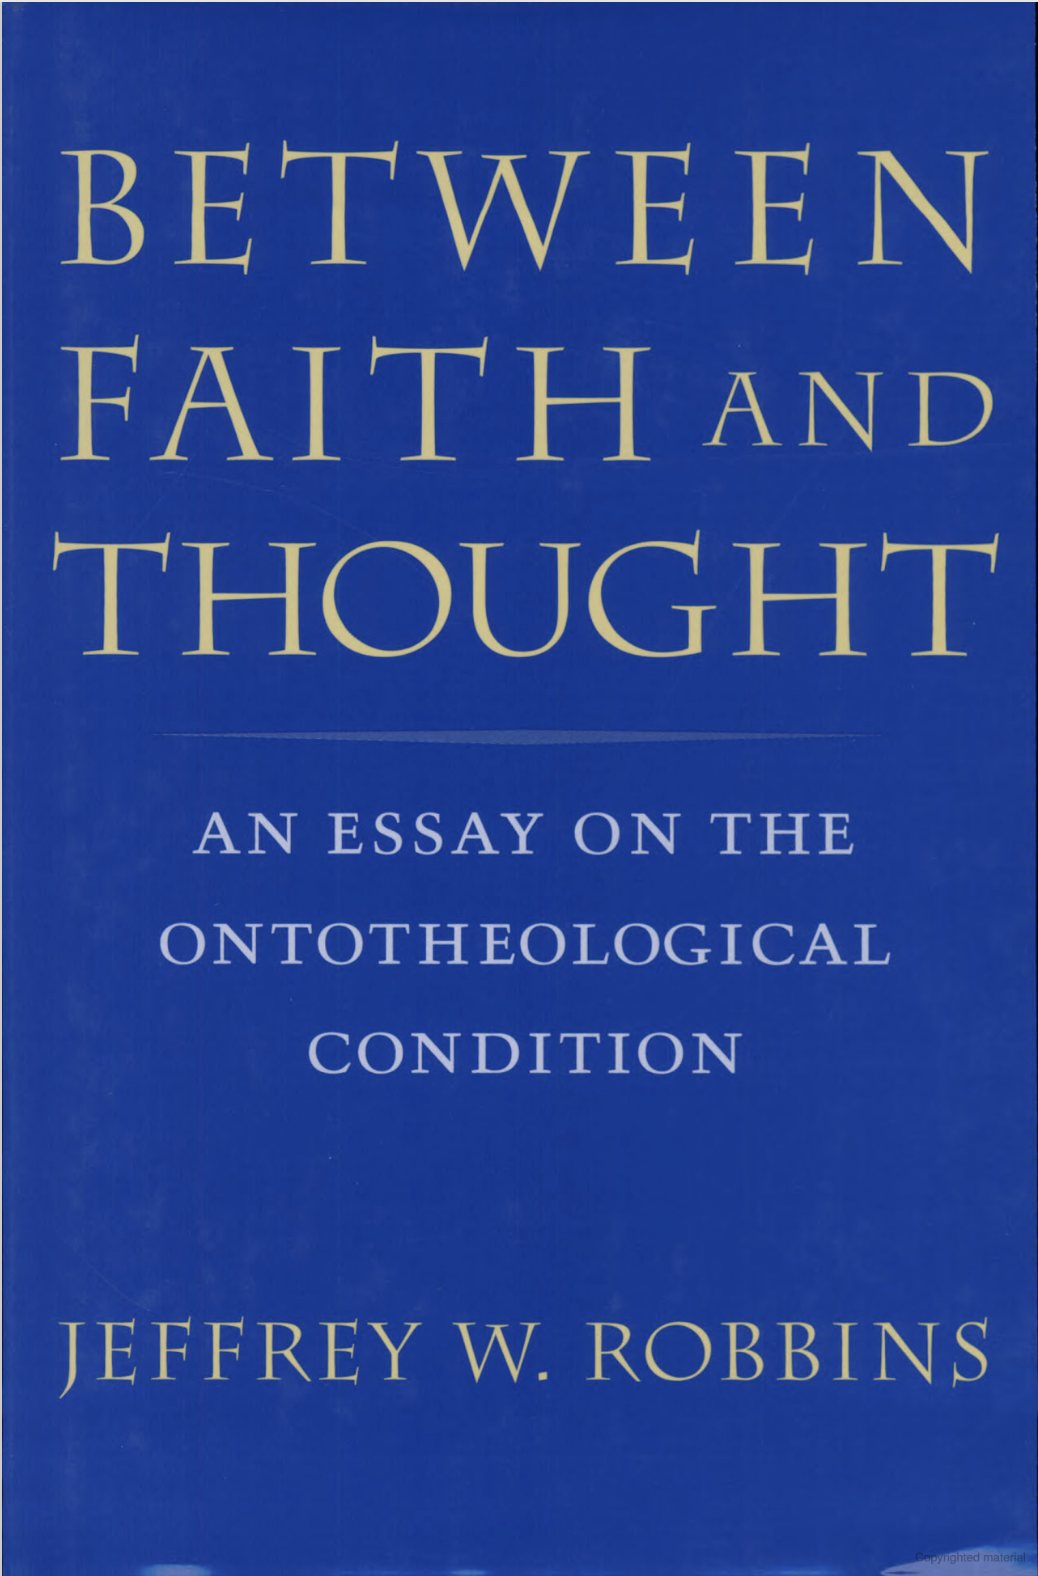 Between Faith and Thought: An Essay on the Ontotheological Condition